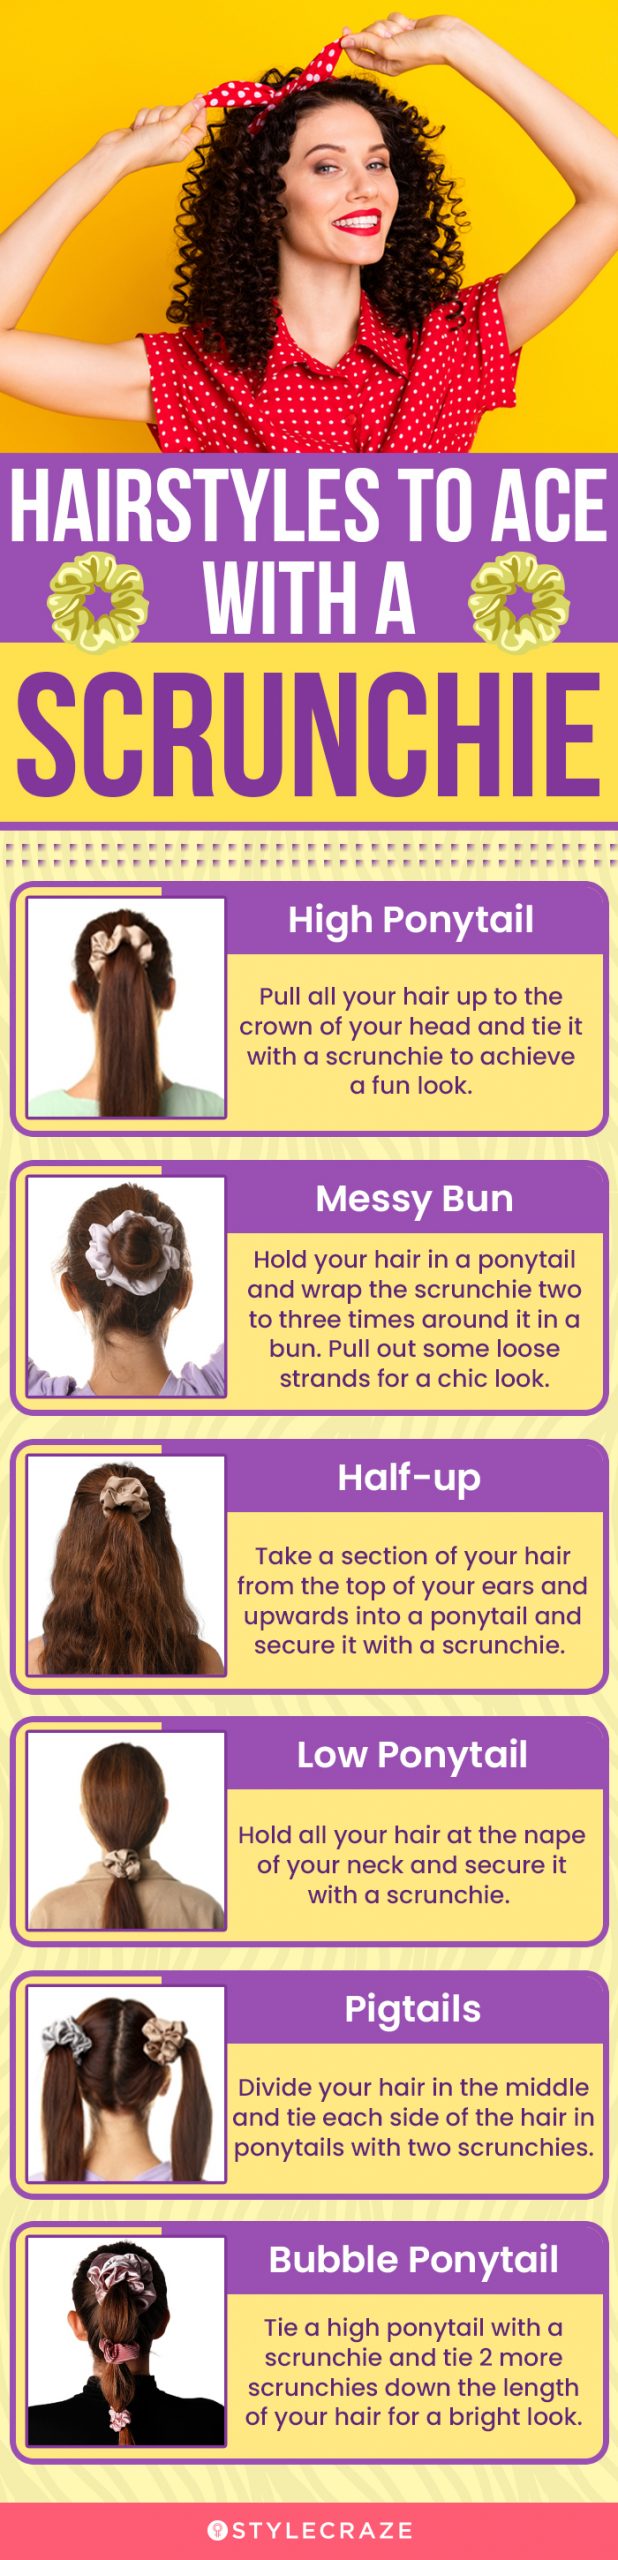 Hairstyles To Ace With A Scrunchie (infographic)